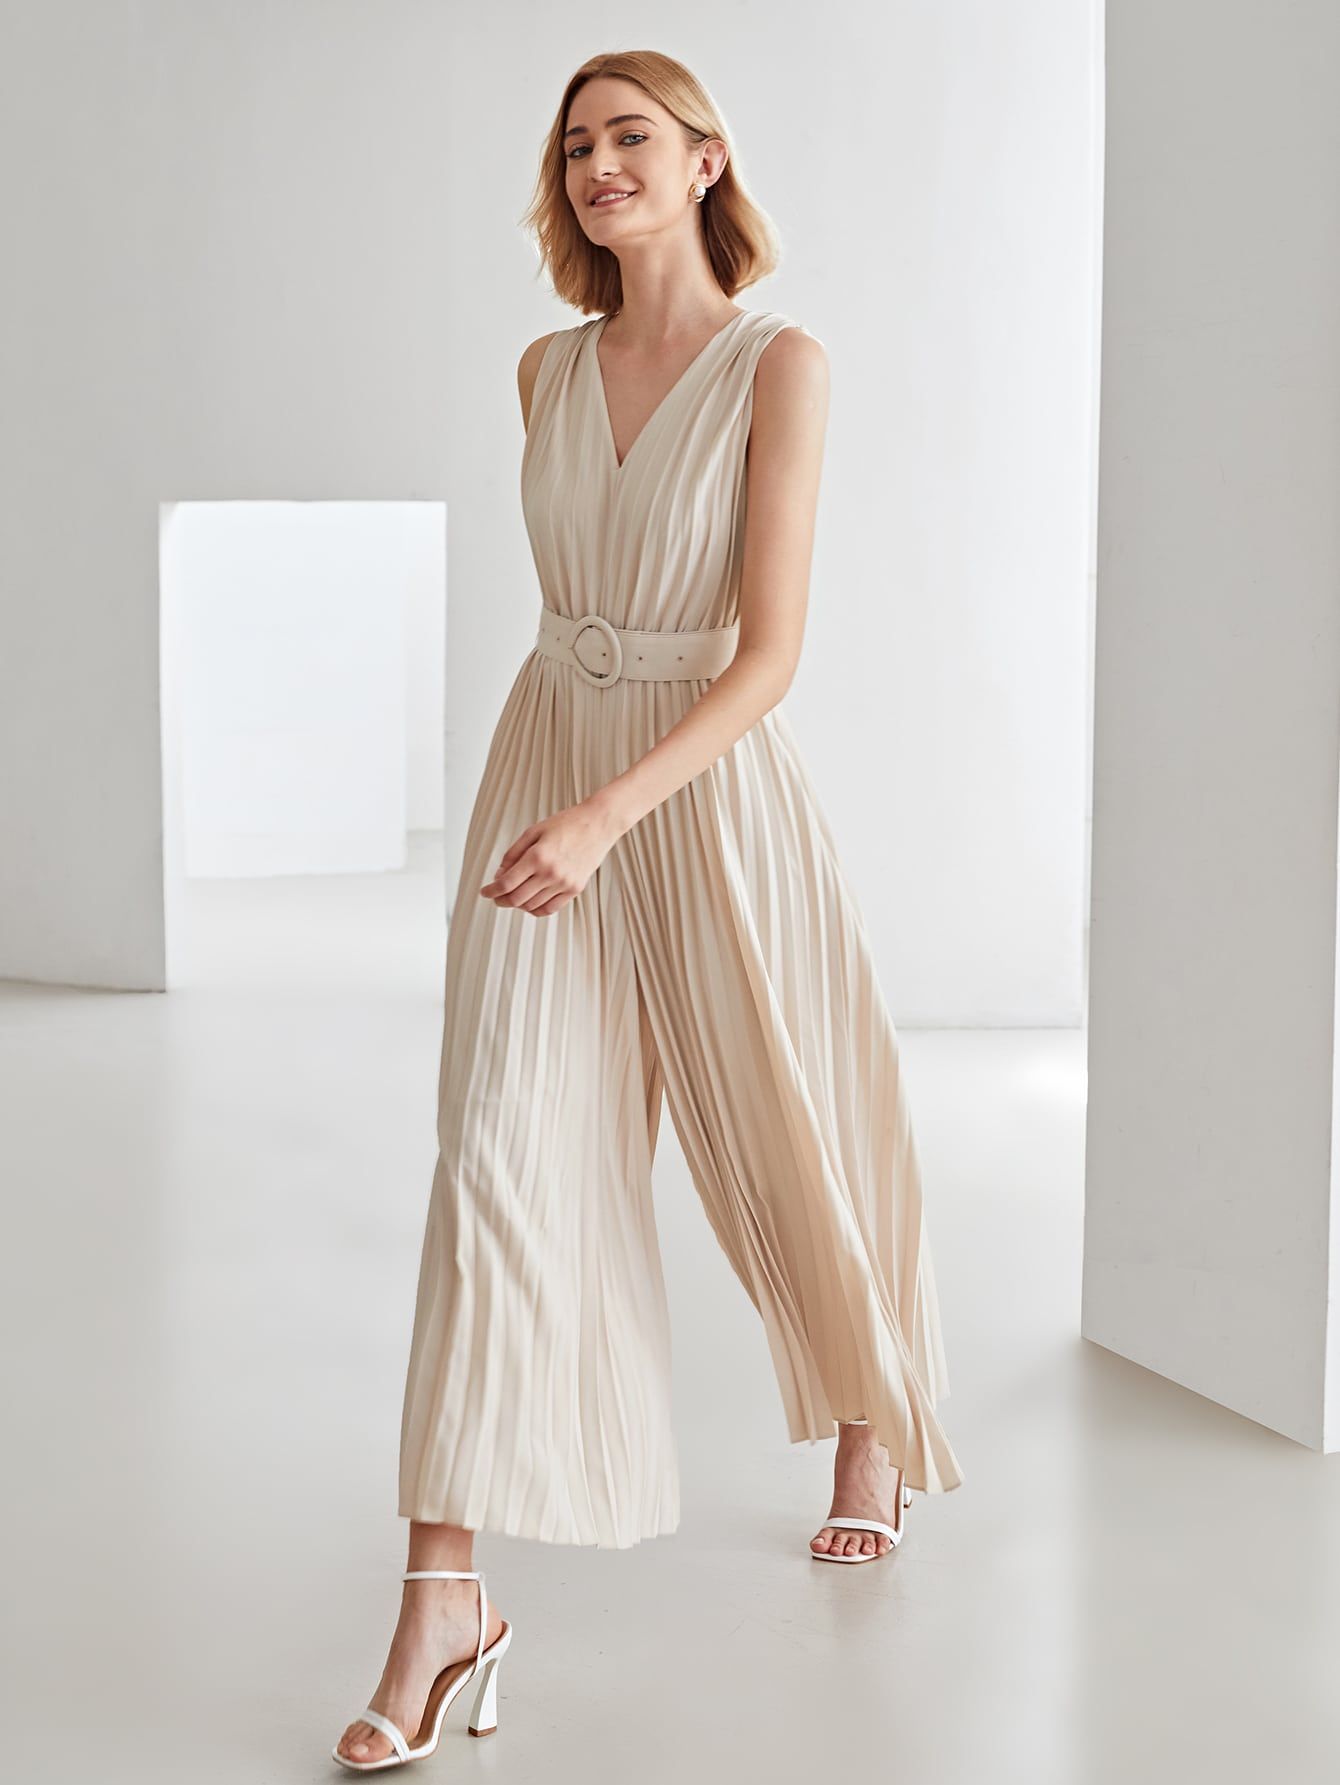 Chic and Comfortable: Stay Stylish in Culotte Jumpsuits